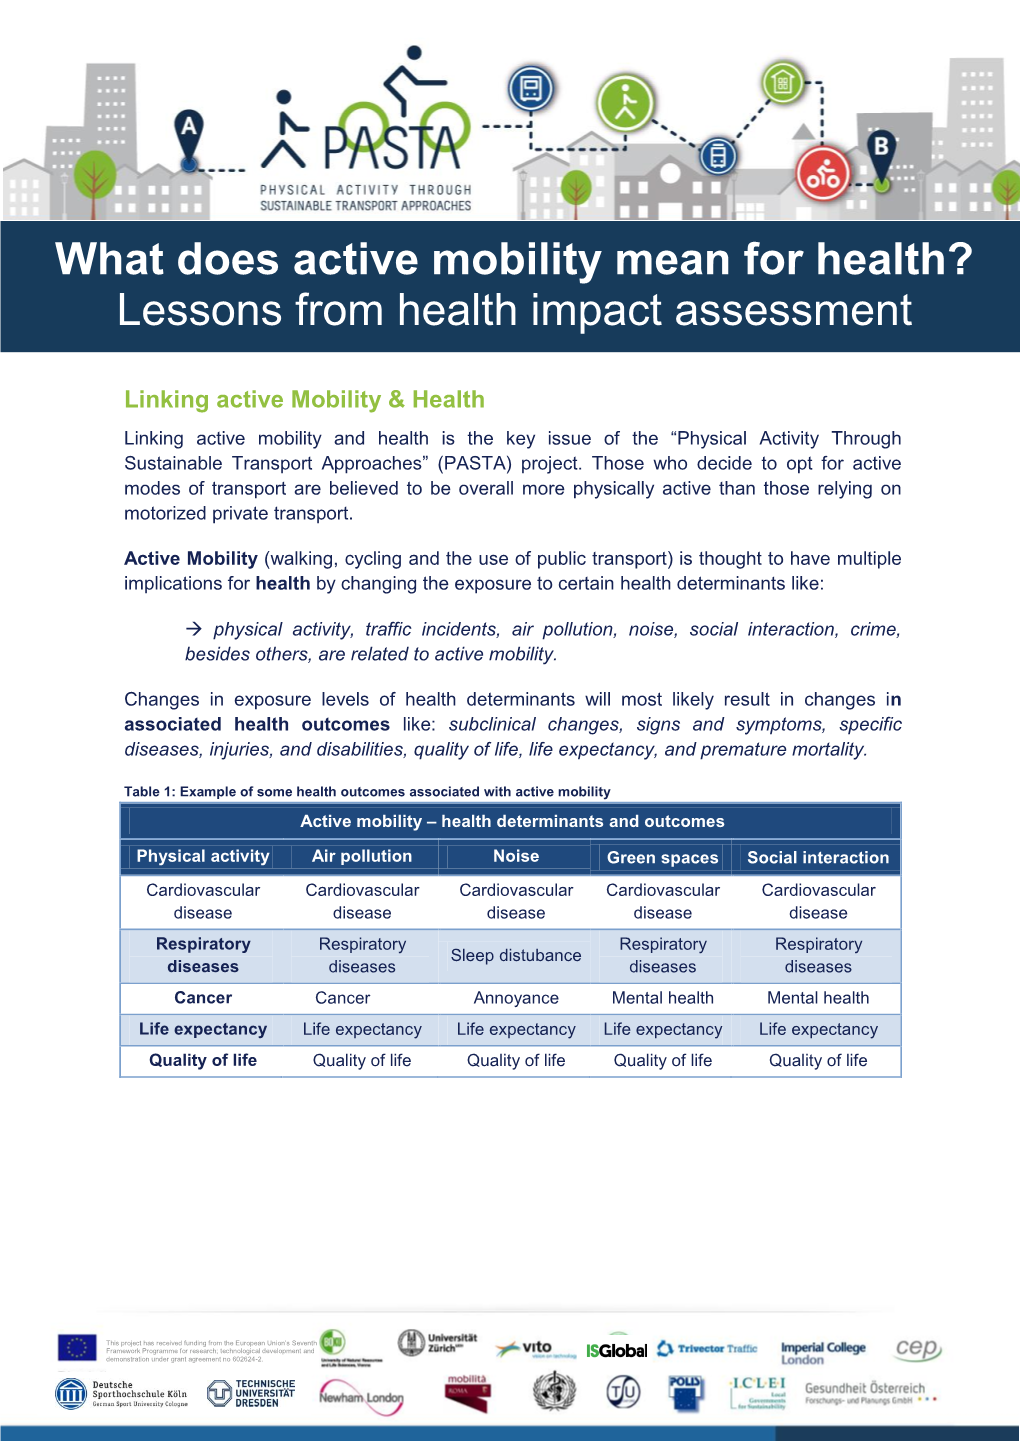 What Does Active Mobility Mean for Health? Lessons from Health Impact Assessment